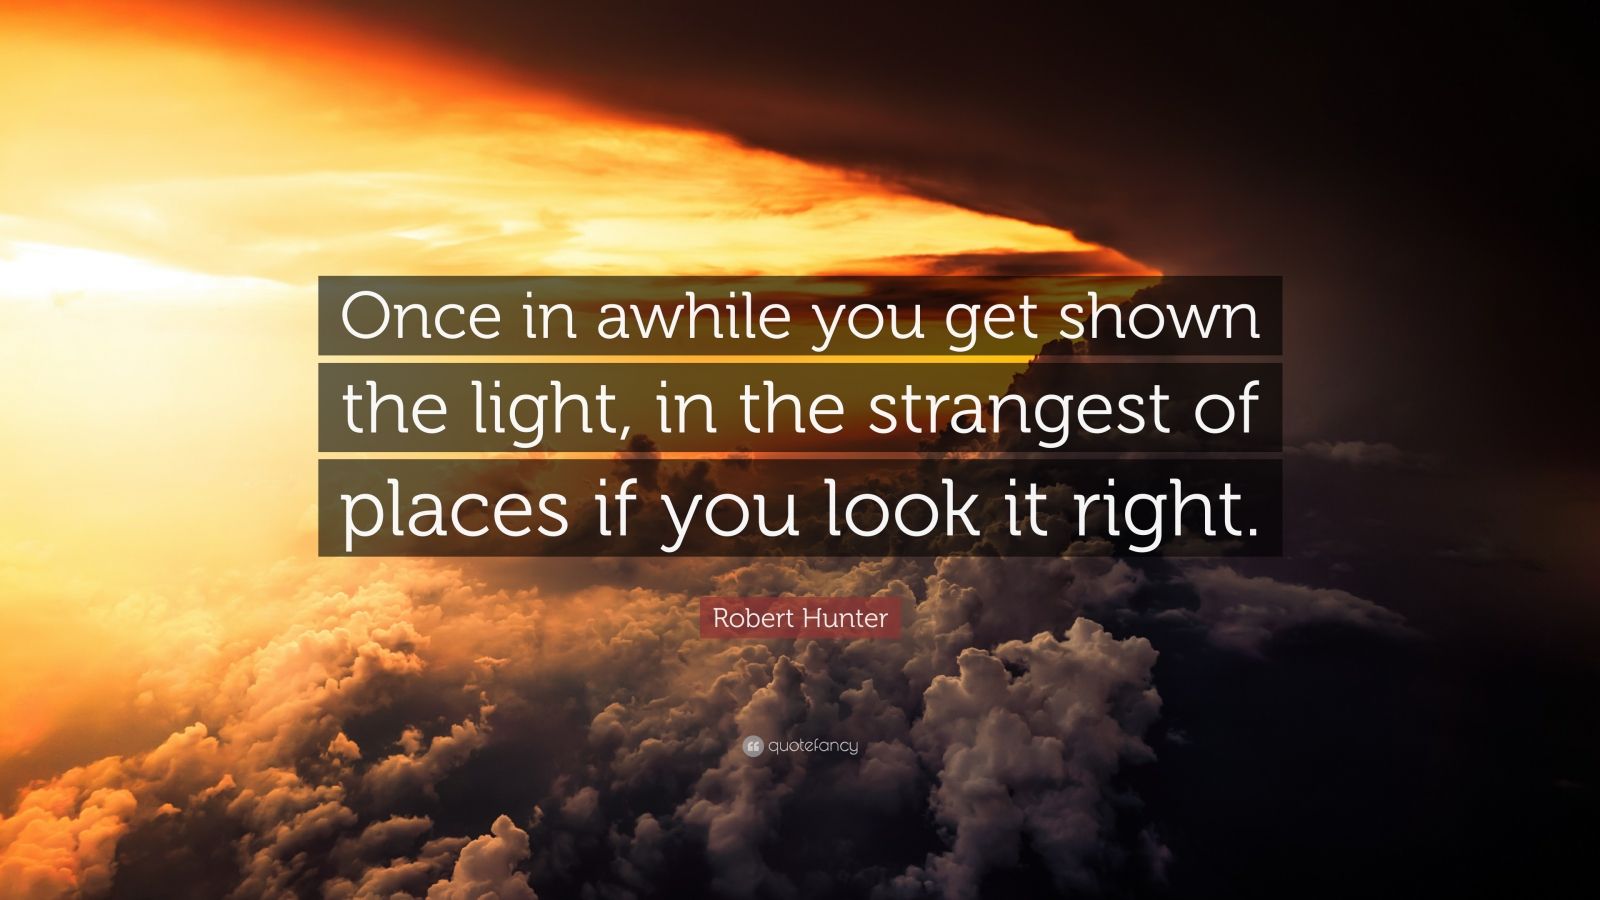 Robert Hunter Quote: “Once in awhile you get shown the light, in the ...